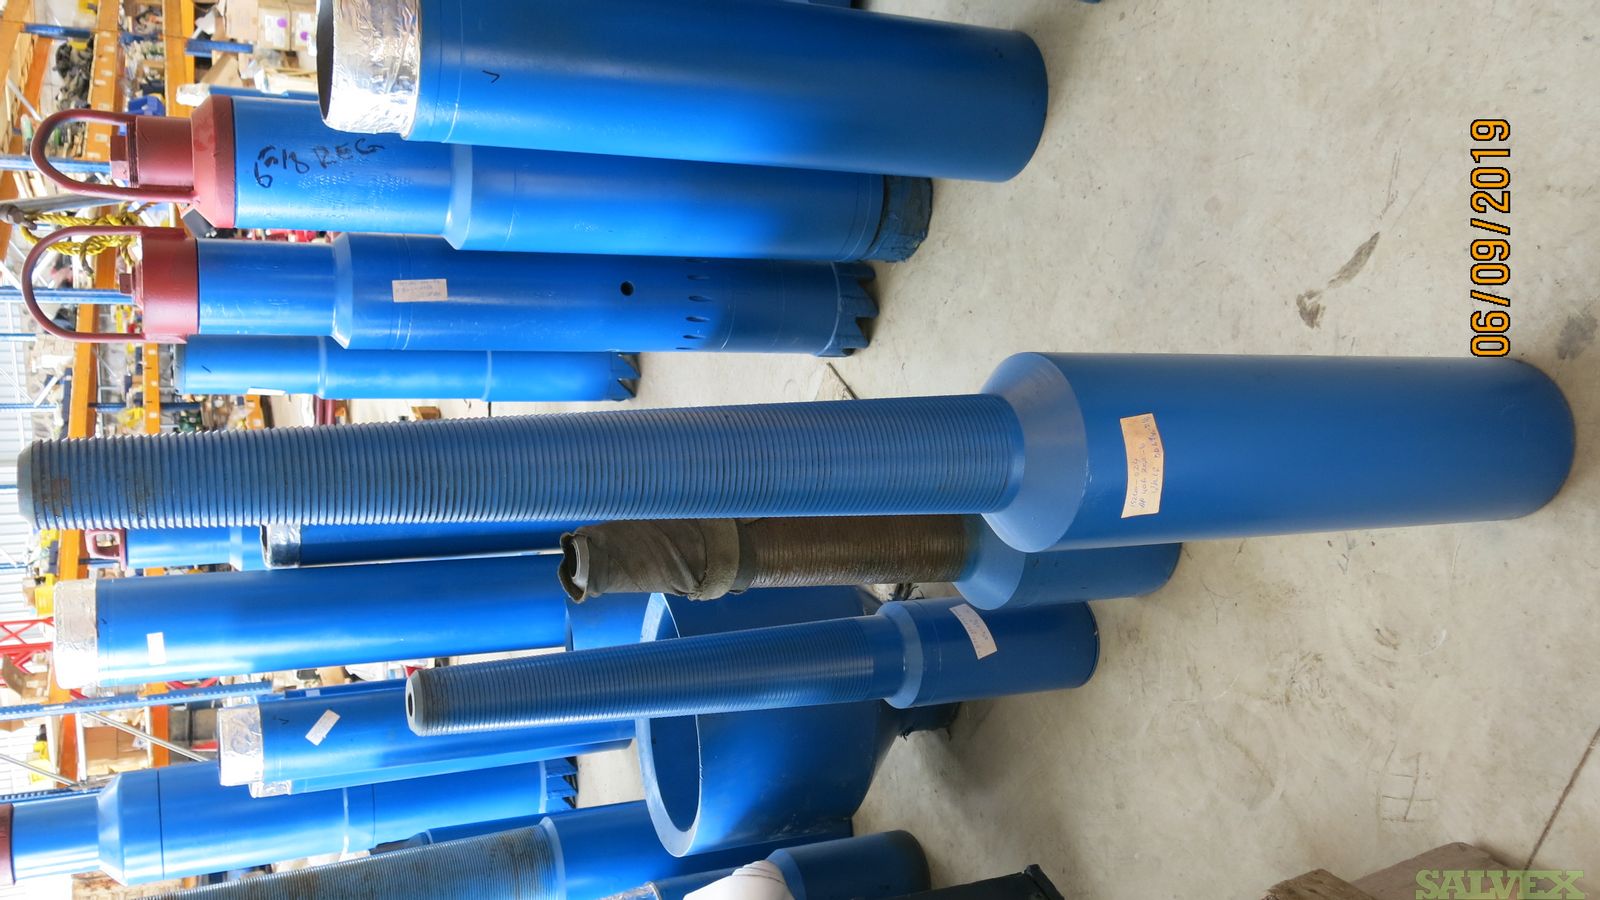 Oilfield Fishing Drilling Tools For Sale, Types Of Fishing Tools In Drilling